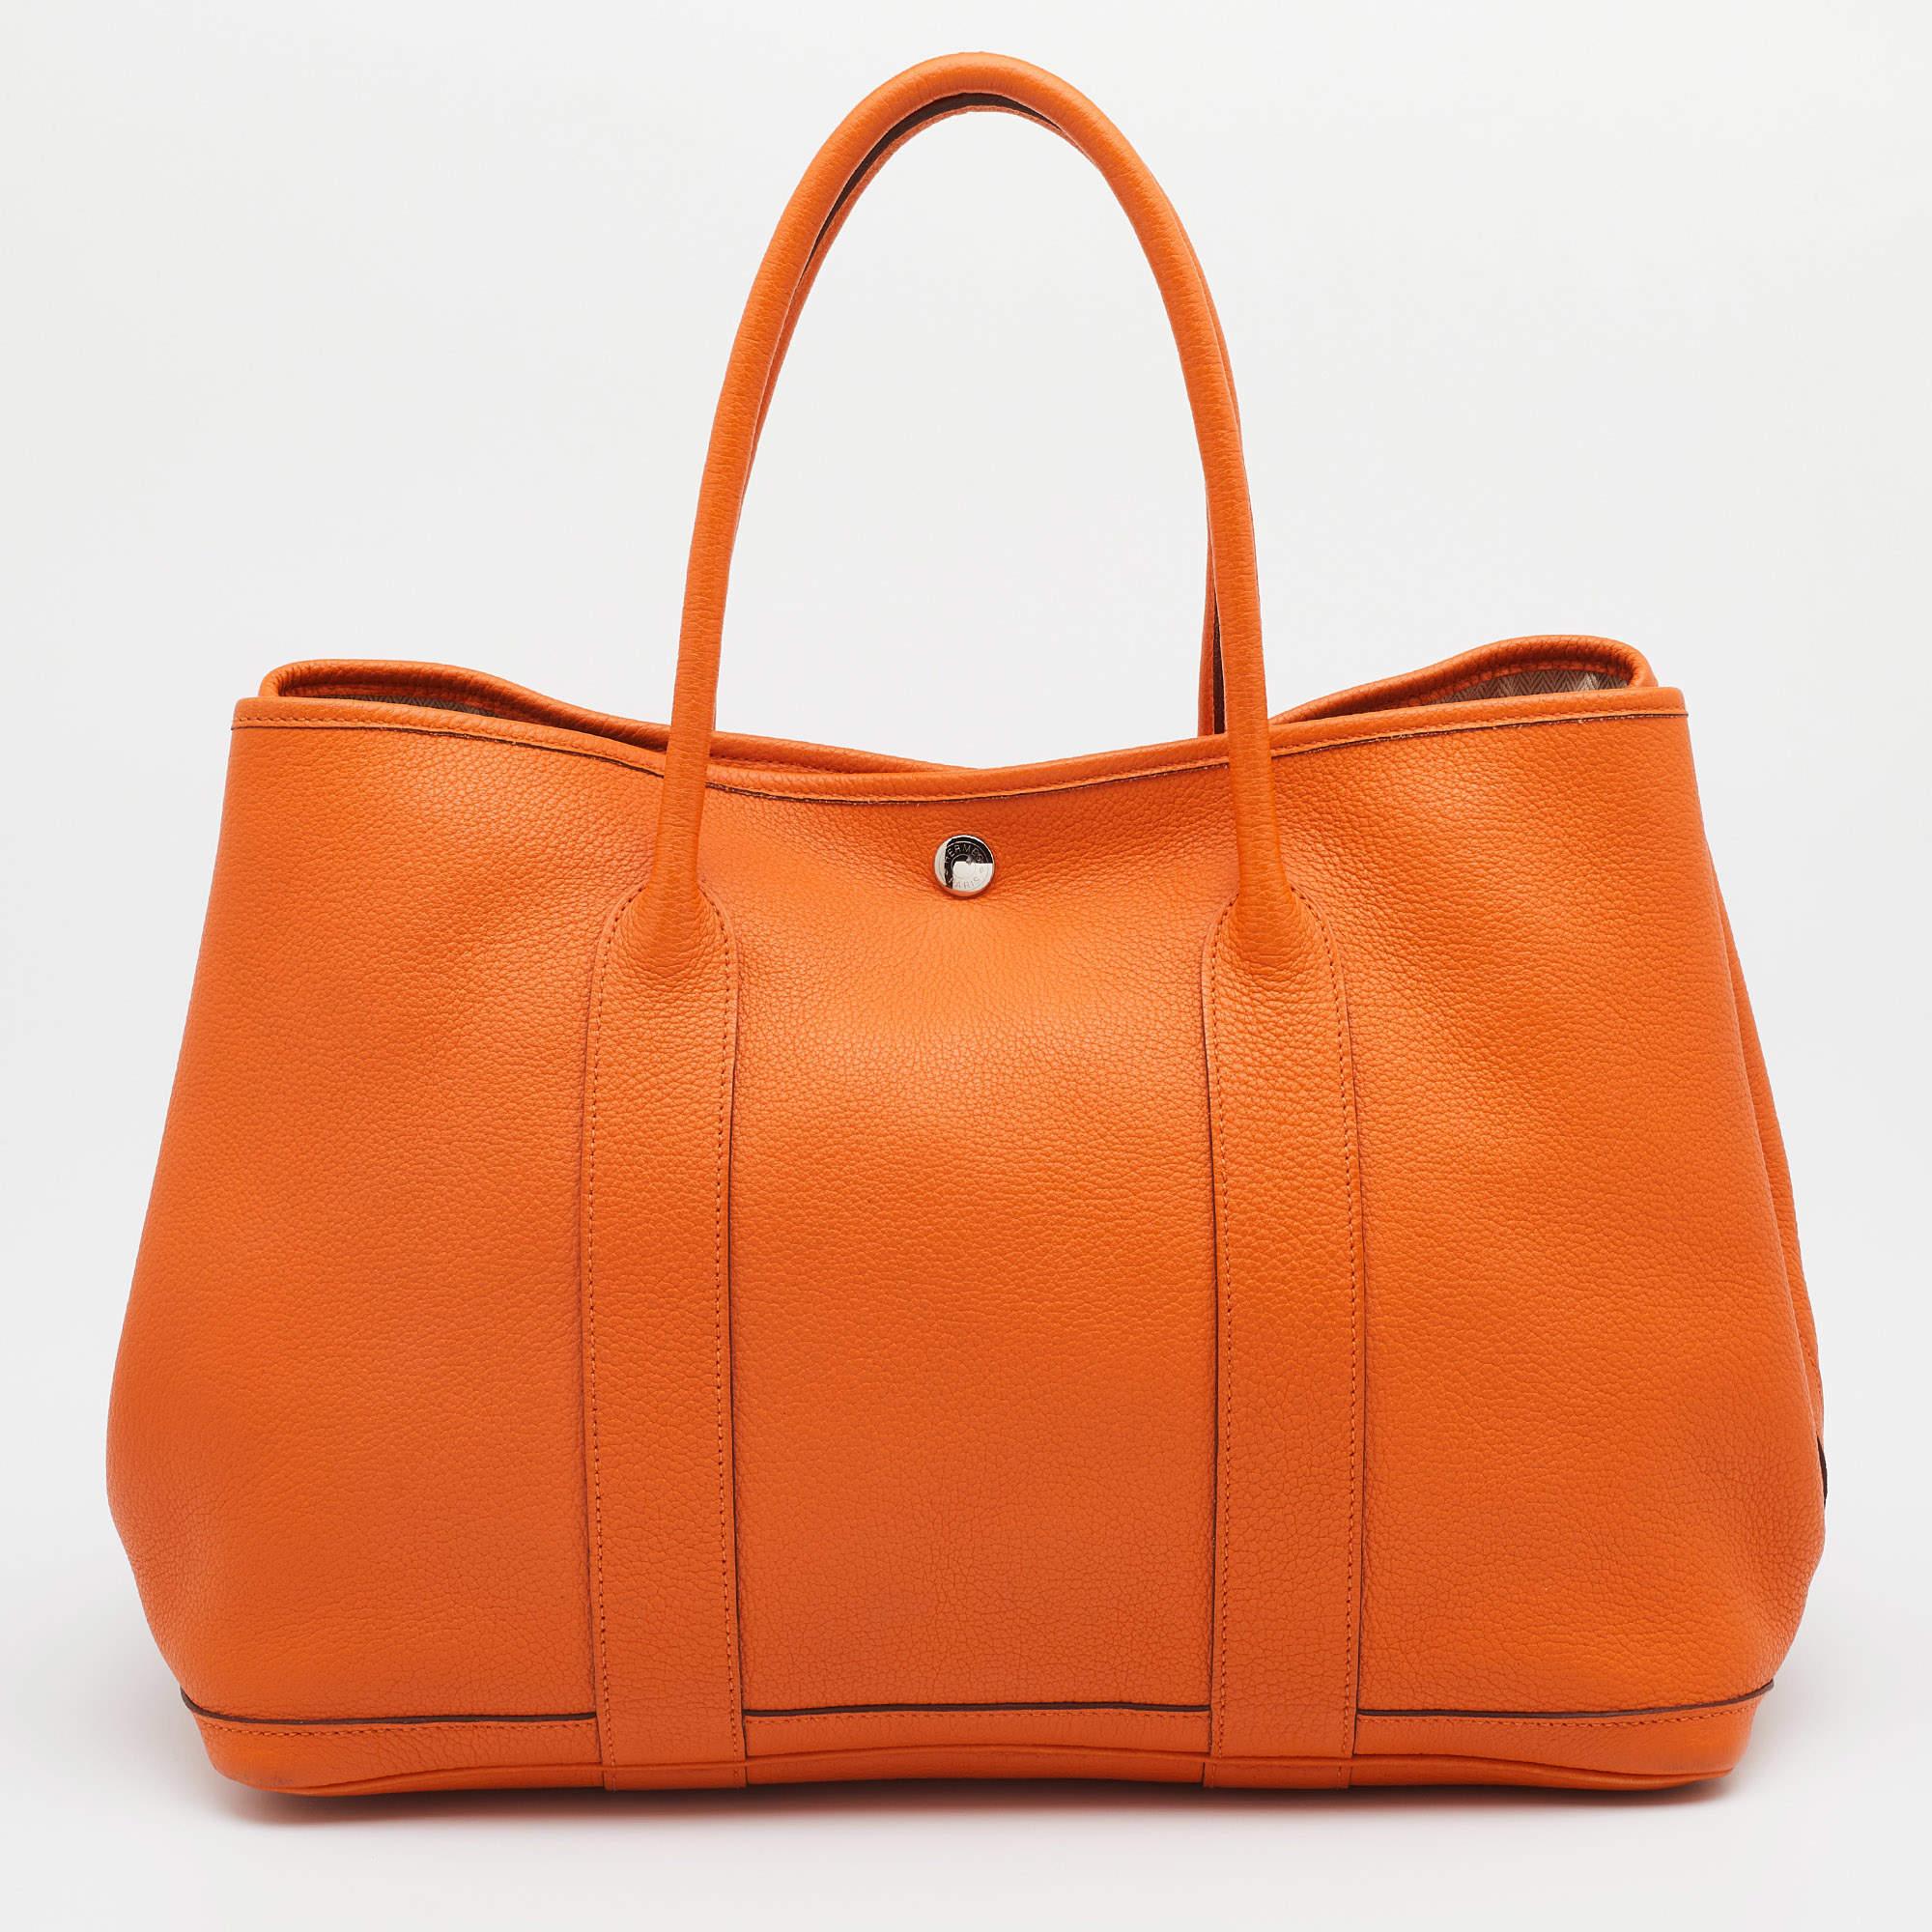 Crafted into an eye-catchy silhouette and style, this Garden Party 36 tote from Hermes exudes just the right amount of charm and elegance! It is made from Orange Negonda leather, with a closure detail highlighting the front. It has a spacious